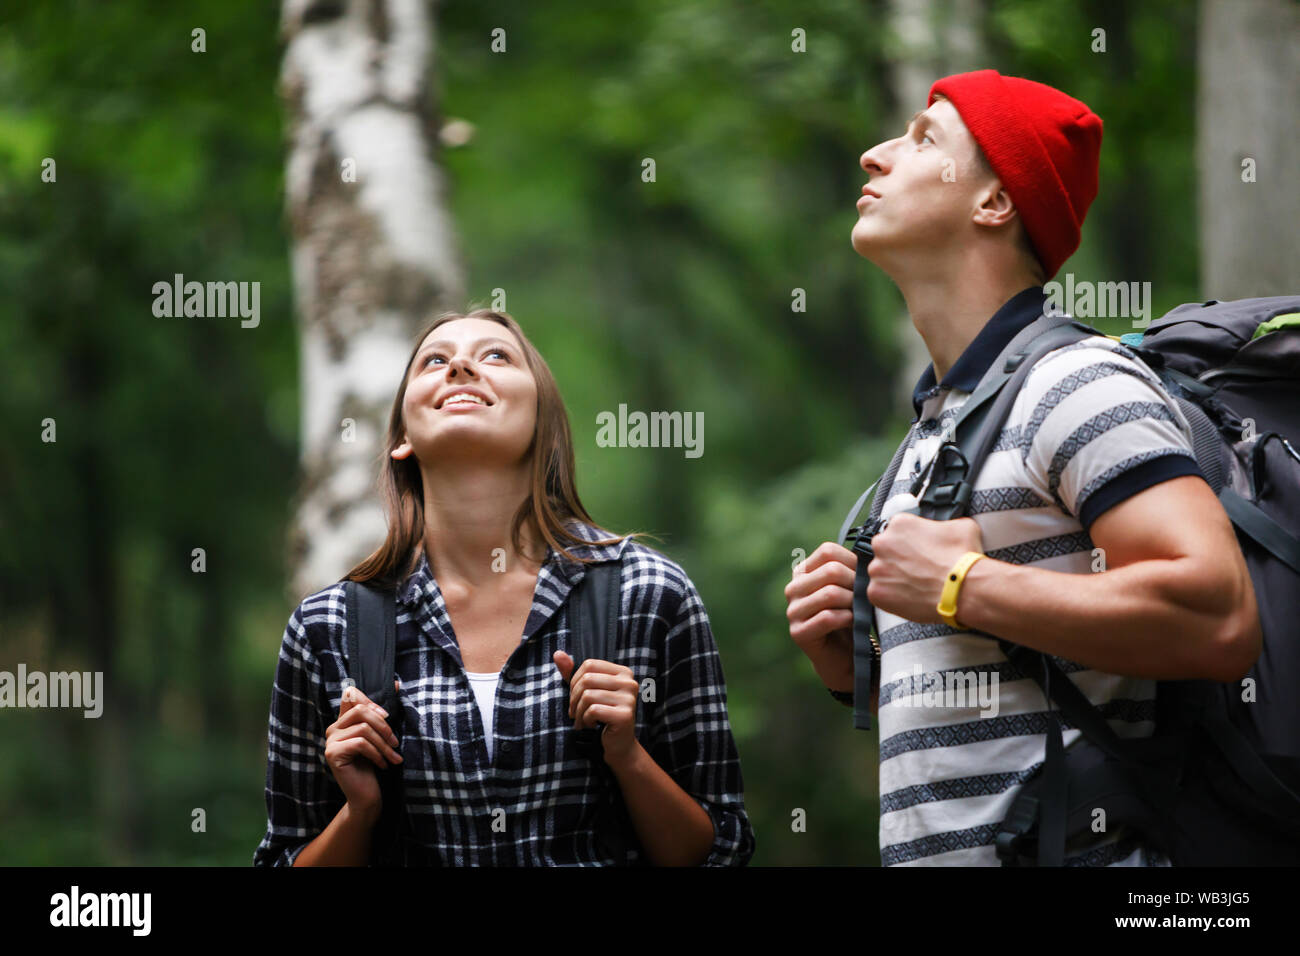 Man in red hat and woman in plaid shirt wearing backpacks in a forest expedition Stock Photo